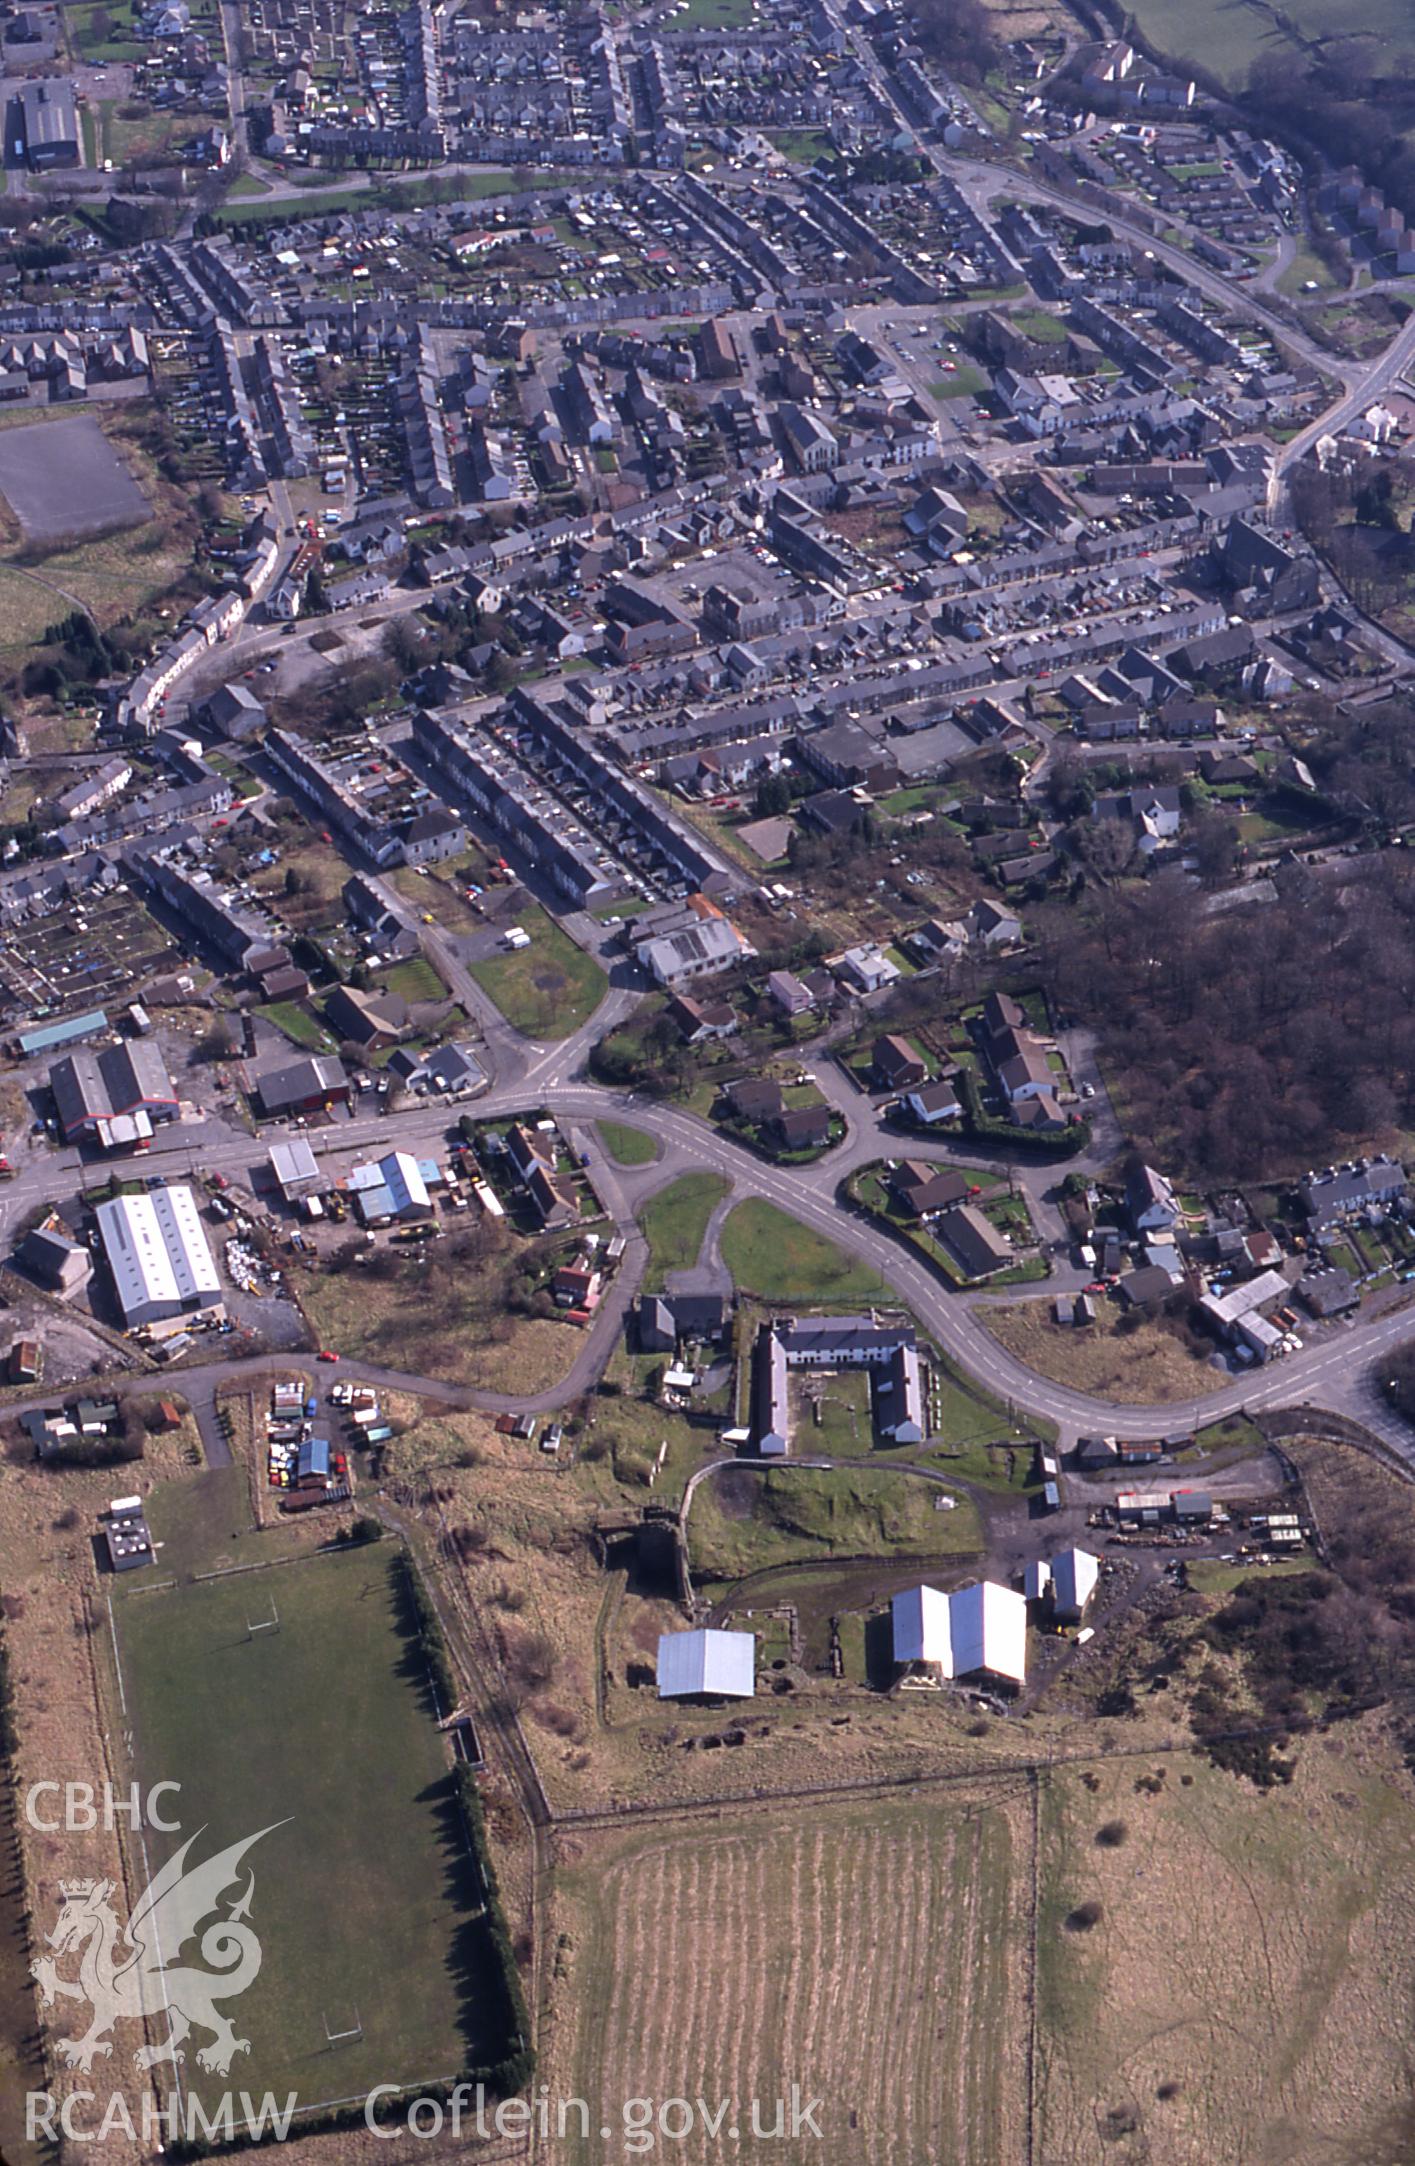 RCAHMW colour slide oblique aerial photograph of Blaenavon Ironworks, taken on 15/03/1999 by Toby Driver